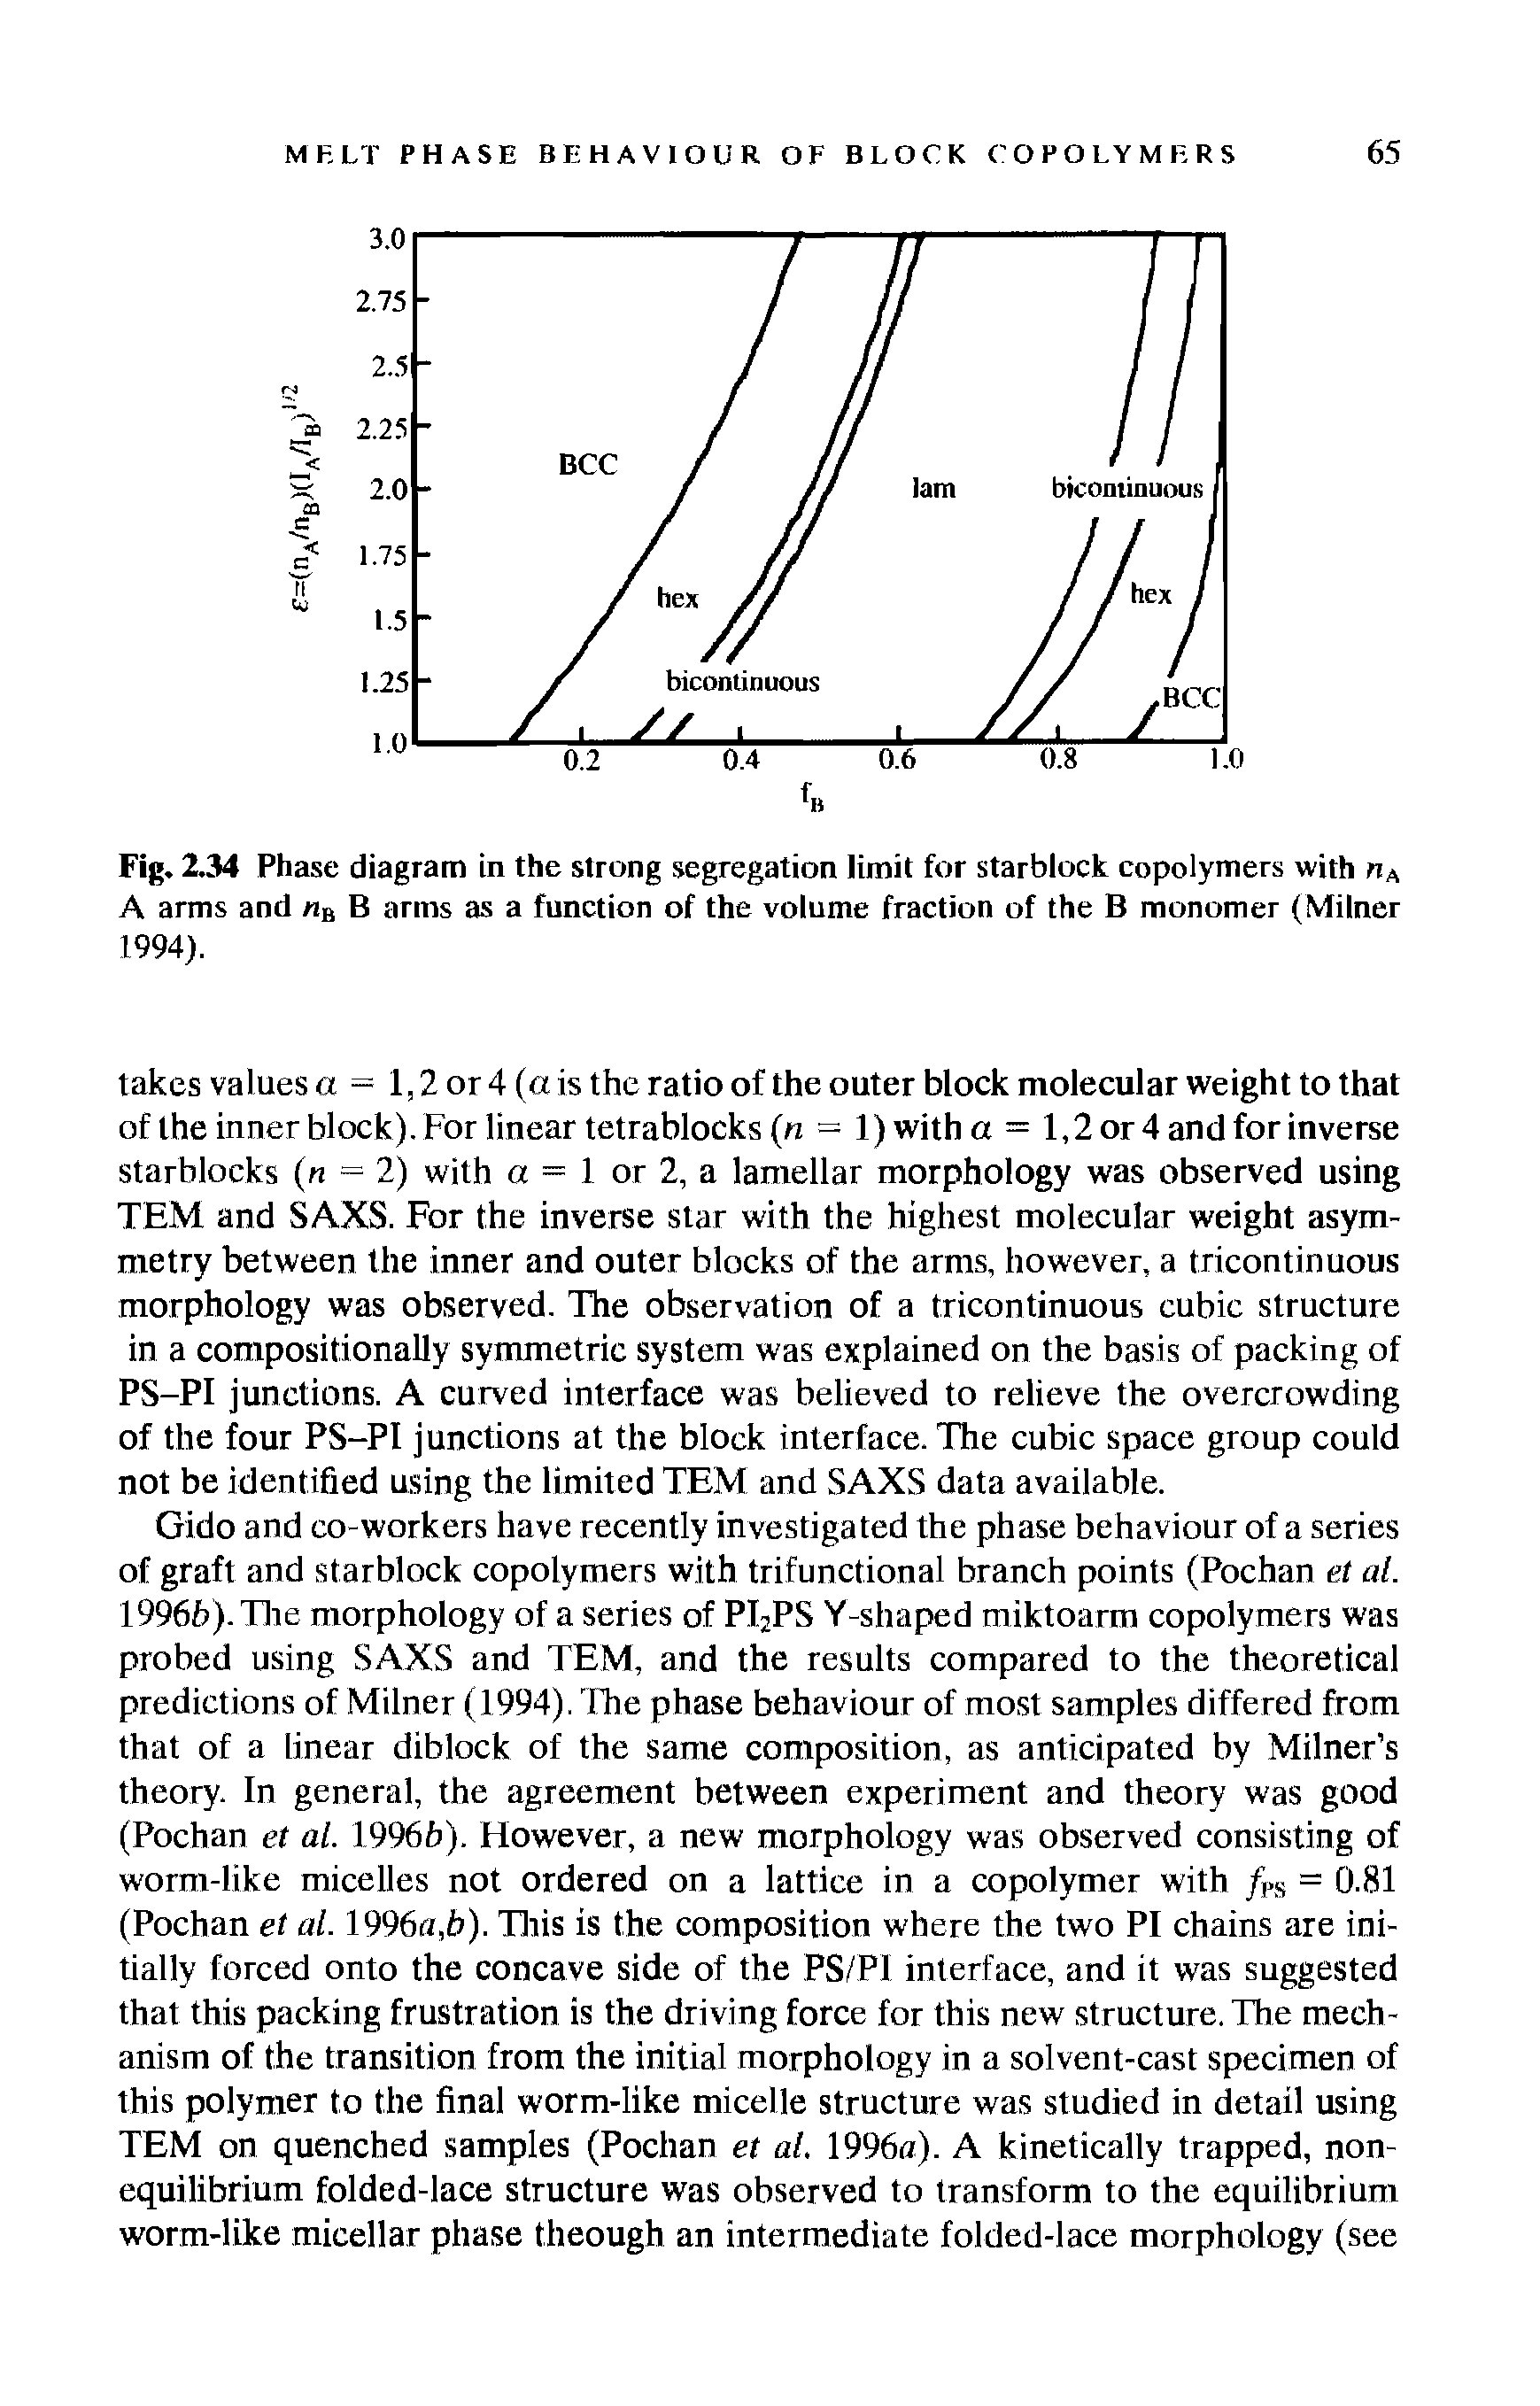 Fig. 2.34 Phase diagram in the strong segregation limit for starblock copolymers with nA A arms and nB B arms as a function of the volume fraction of the B monomer (Milner 1994).